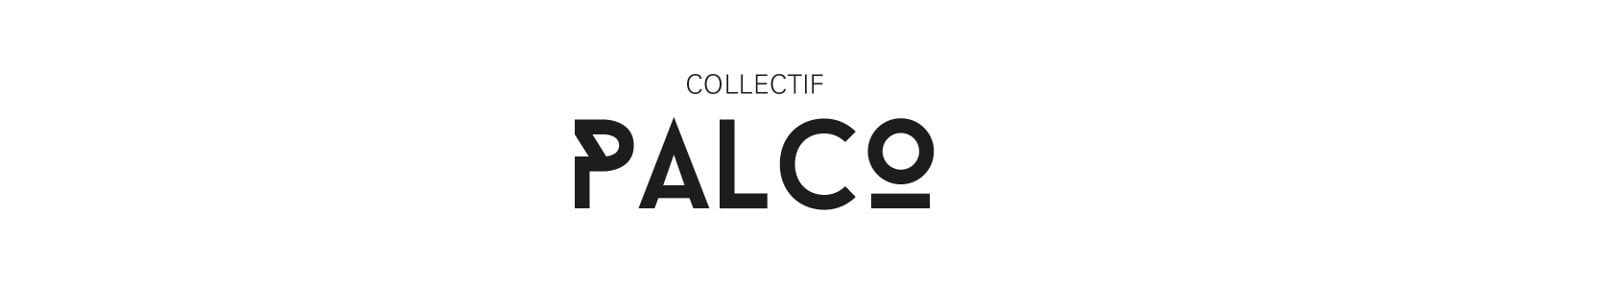 Collectif Palco